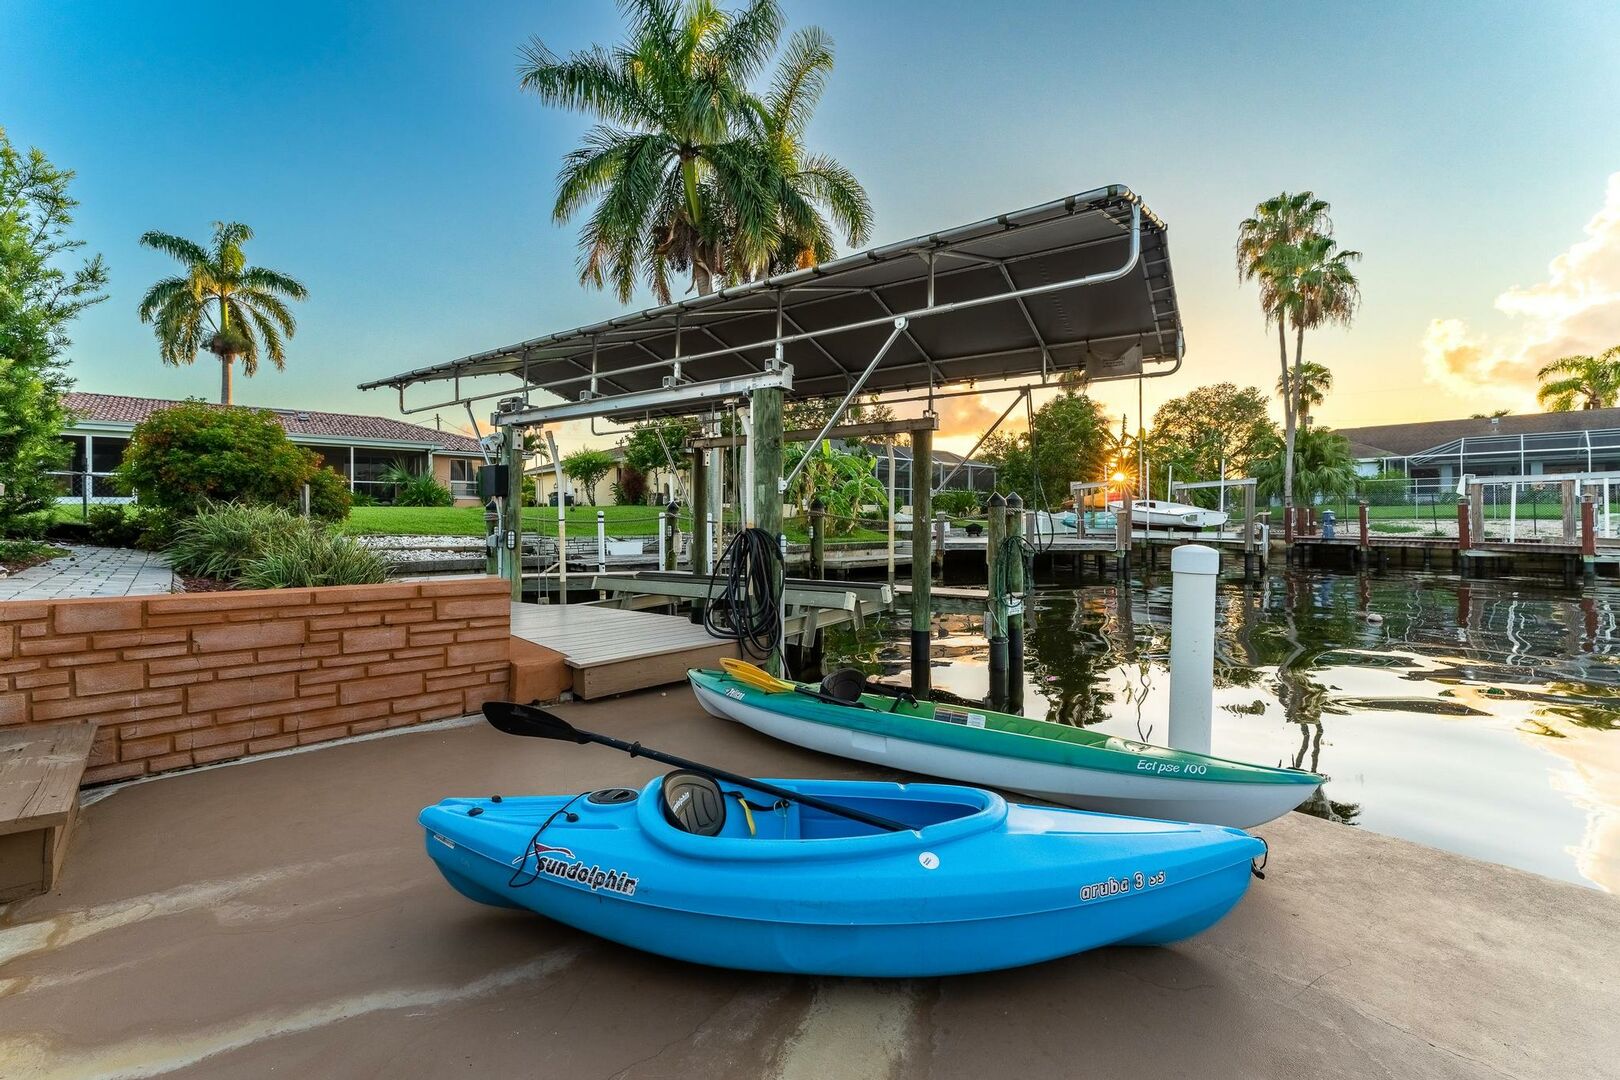 Cape Coral Vacation home with kayaks